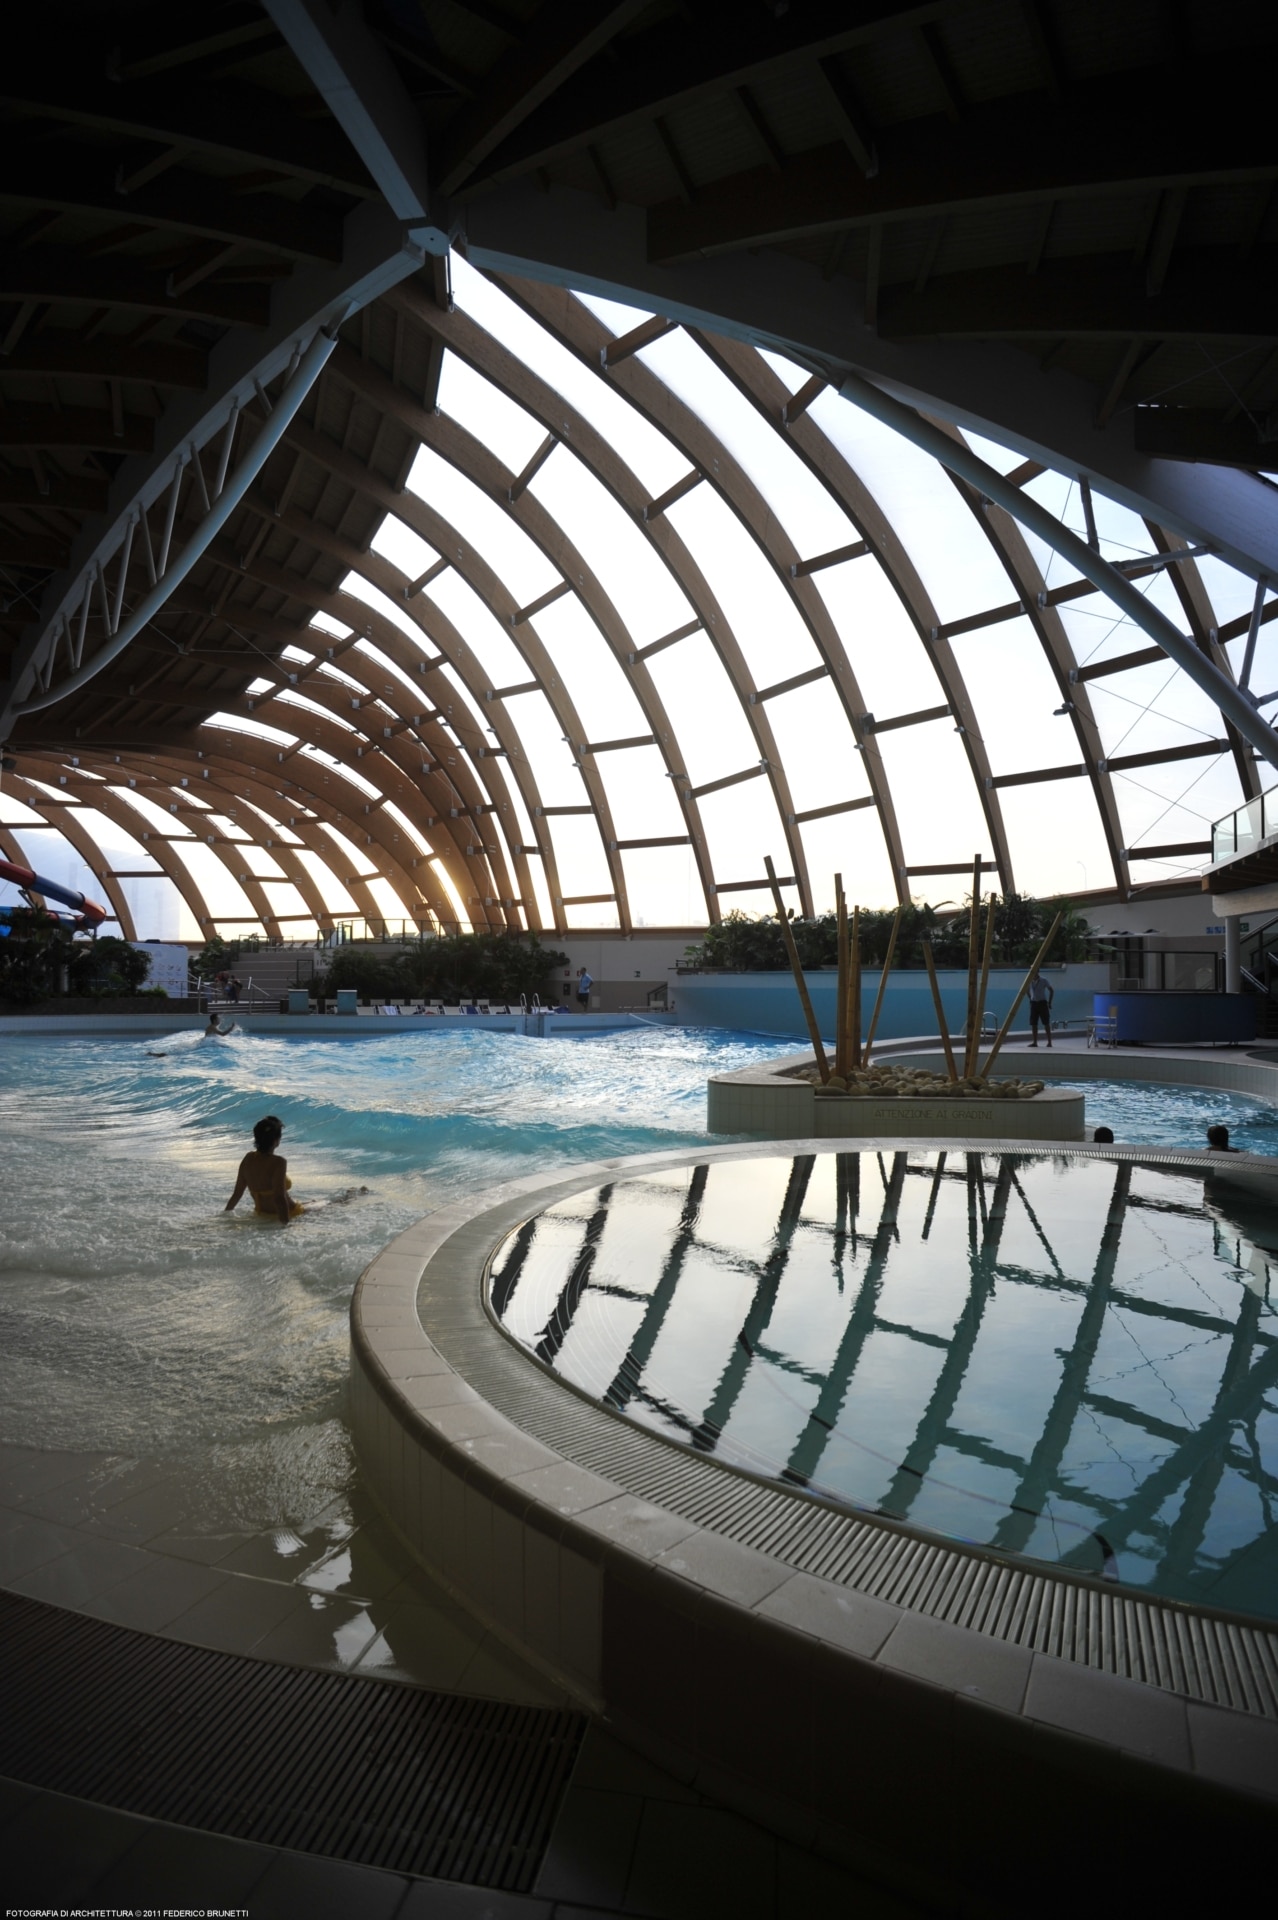 AcquaWorld is Italy’s first all-year indoor water park, under a ETFE roof with exceptional light transmission properties. 